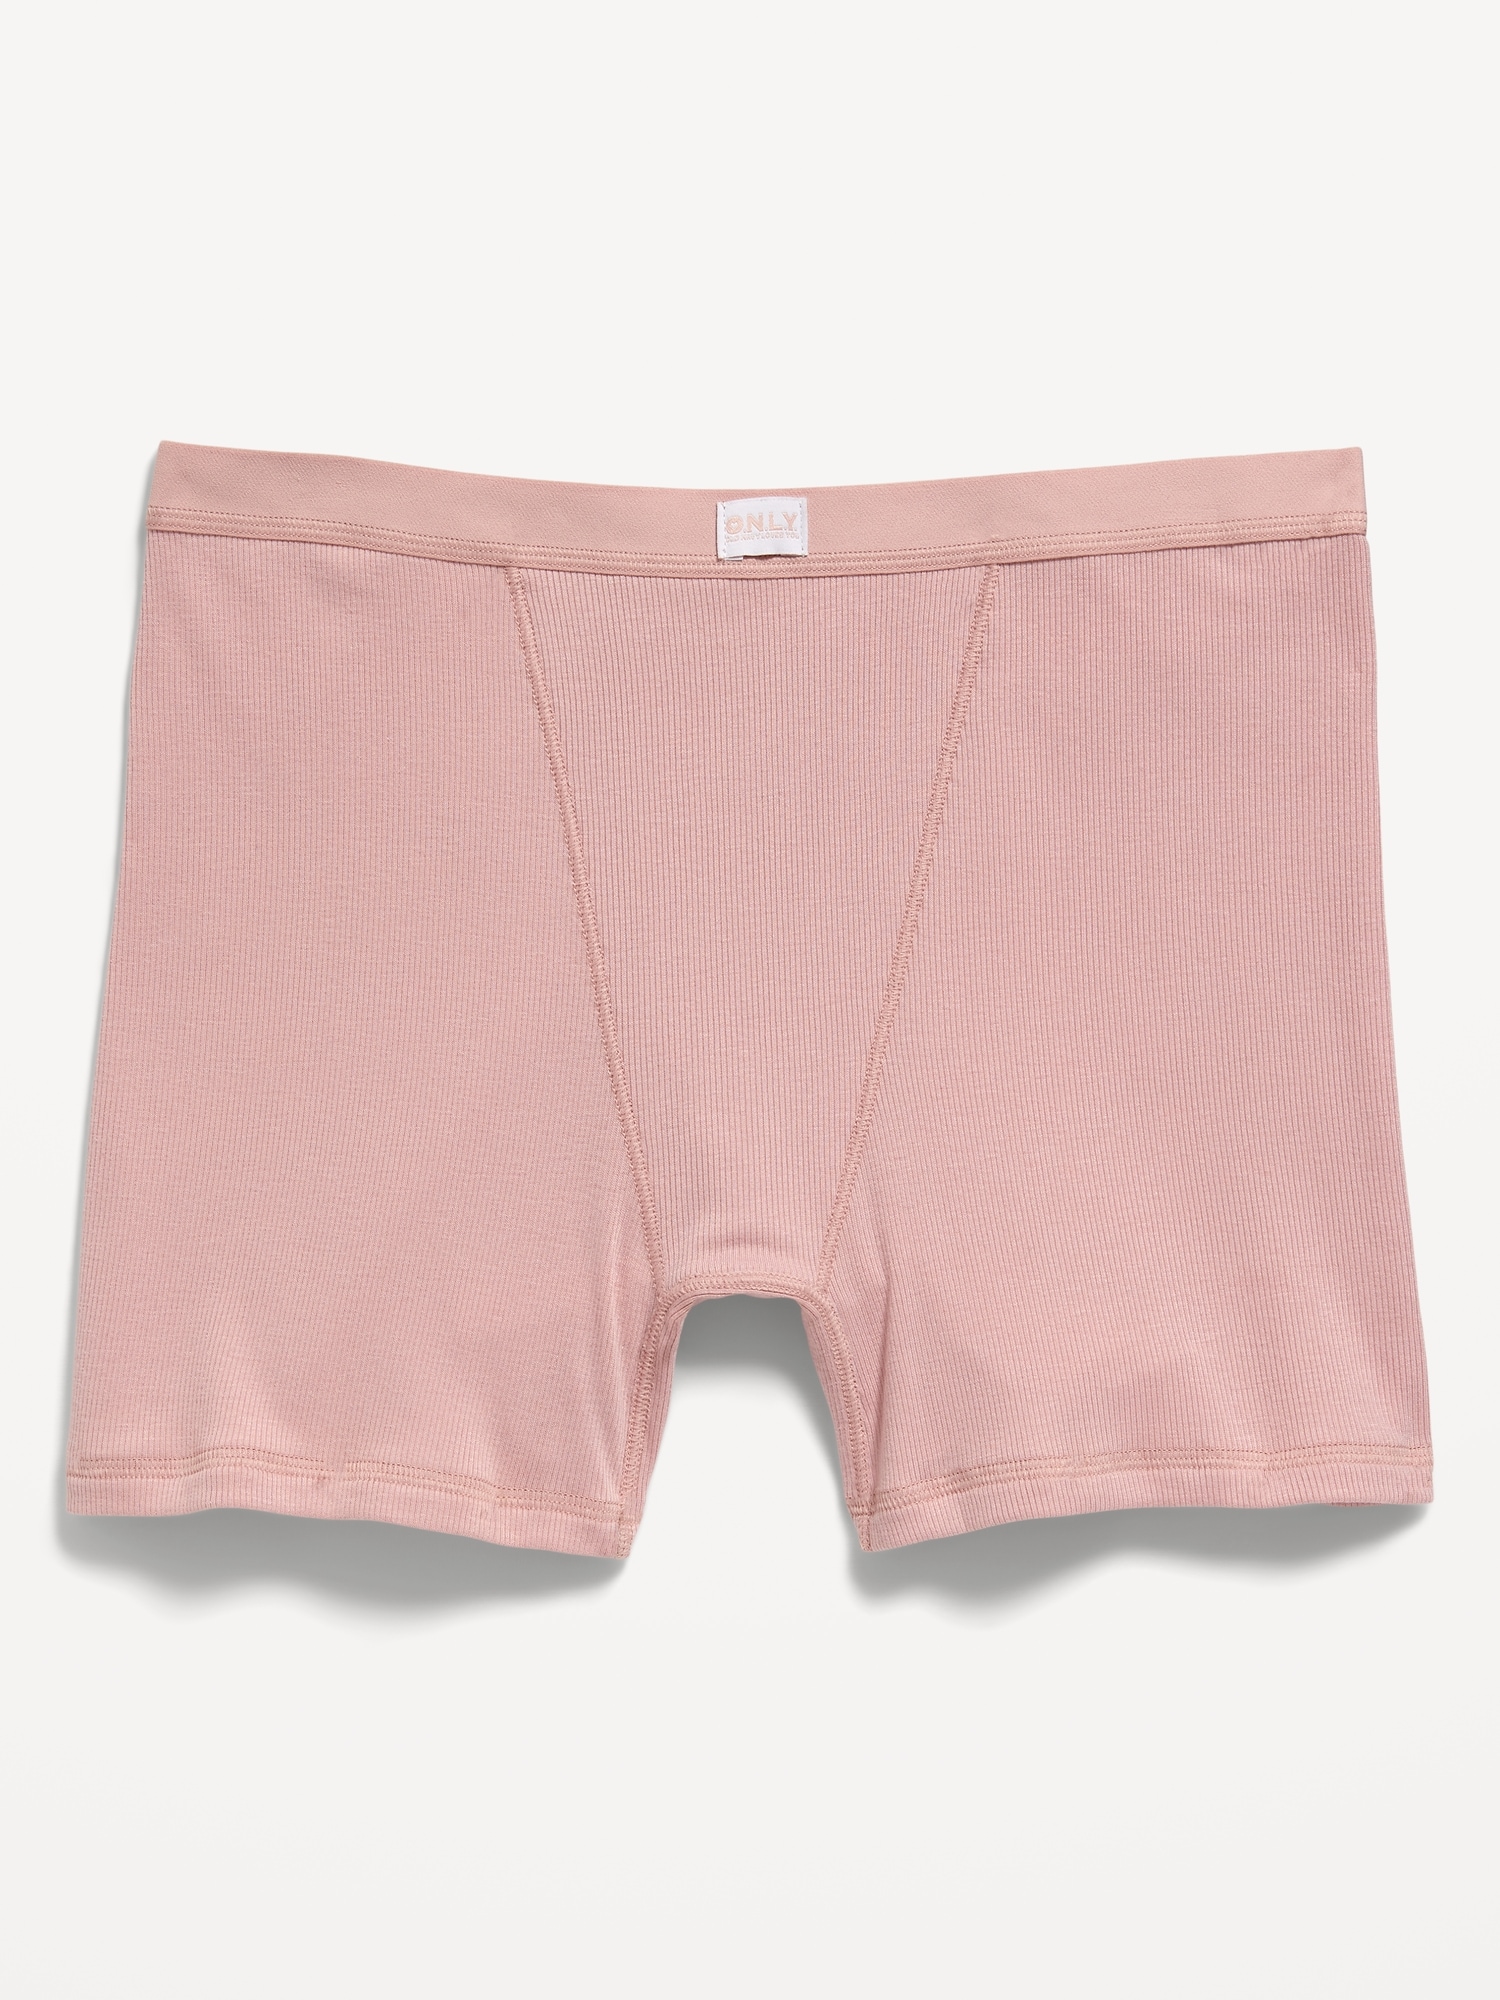 Old Navy High-Waisted Rib-Knit Boyshort Boxer Briefs for Women -- 3-inch inseam pink. 1